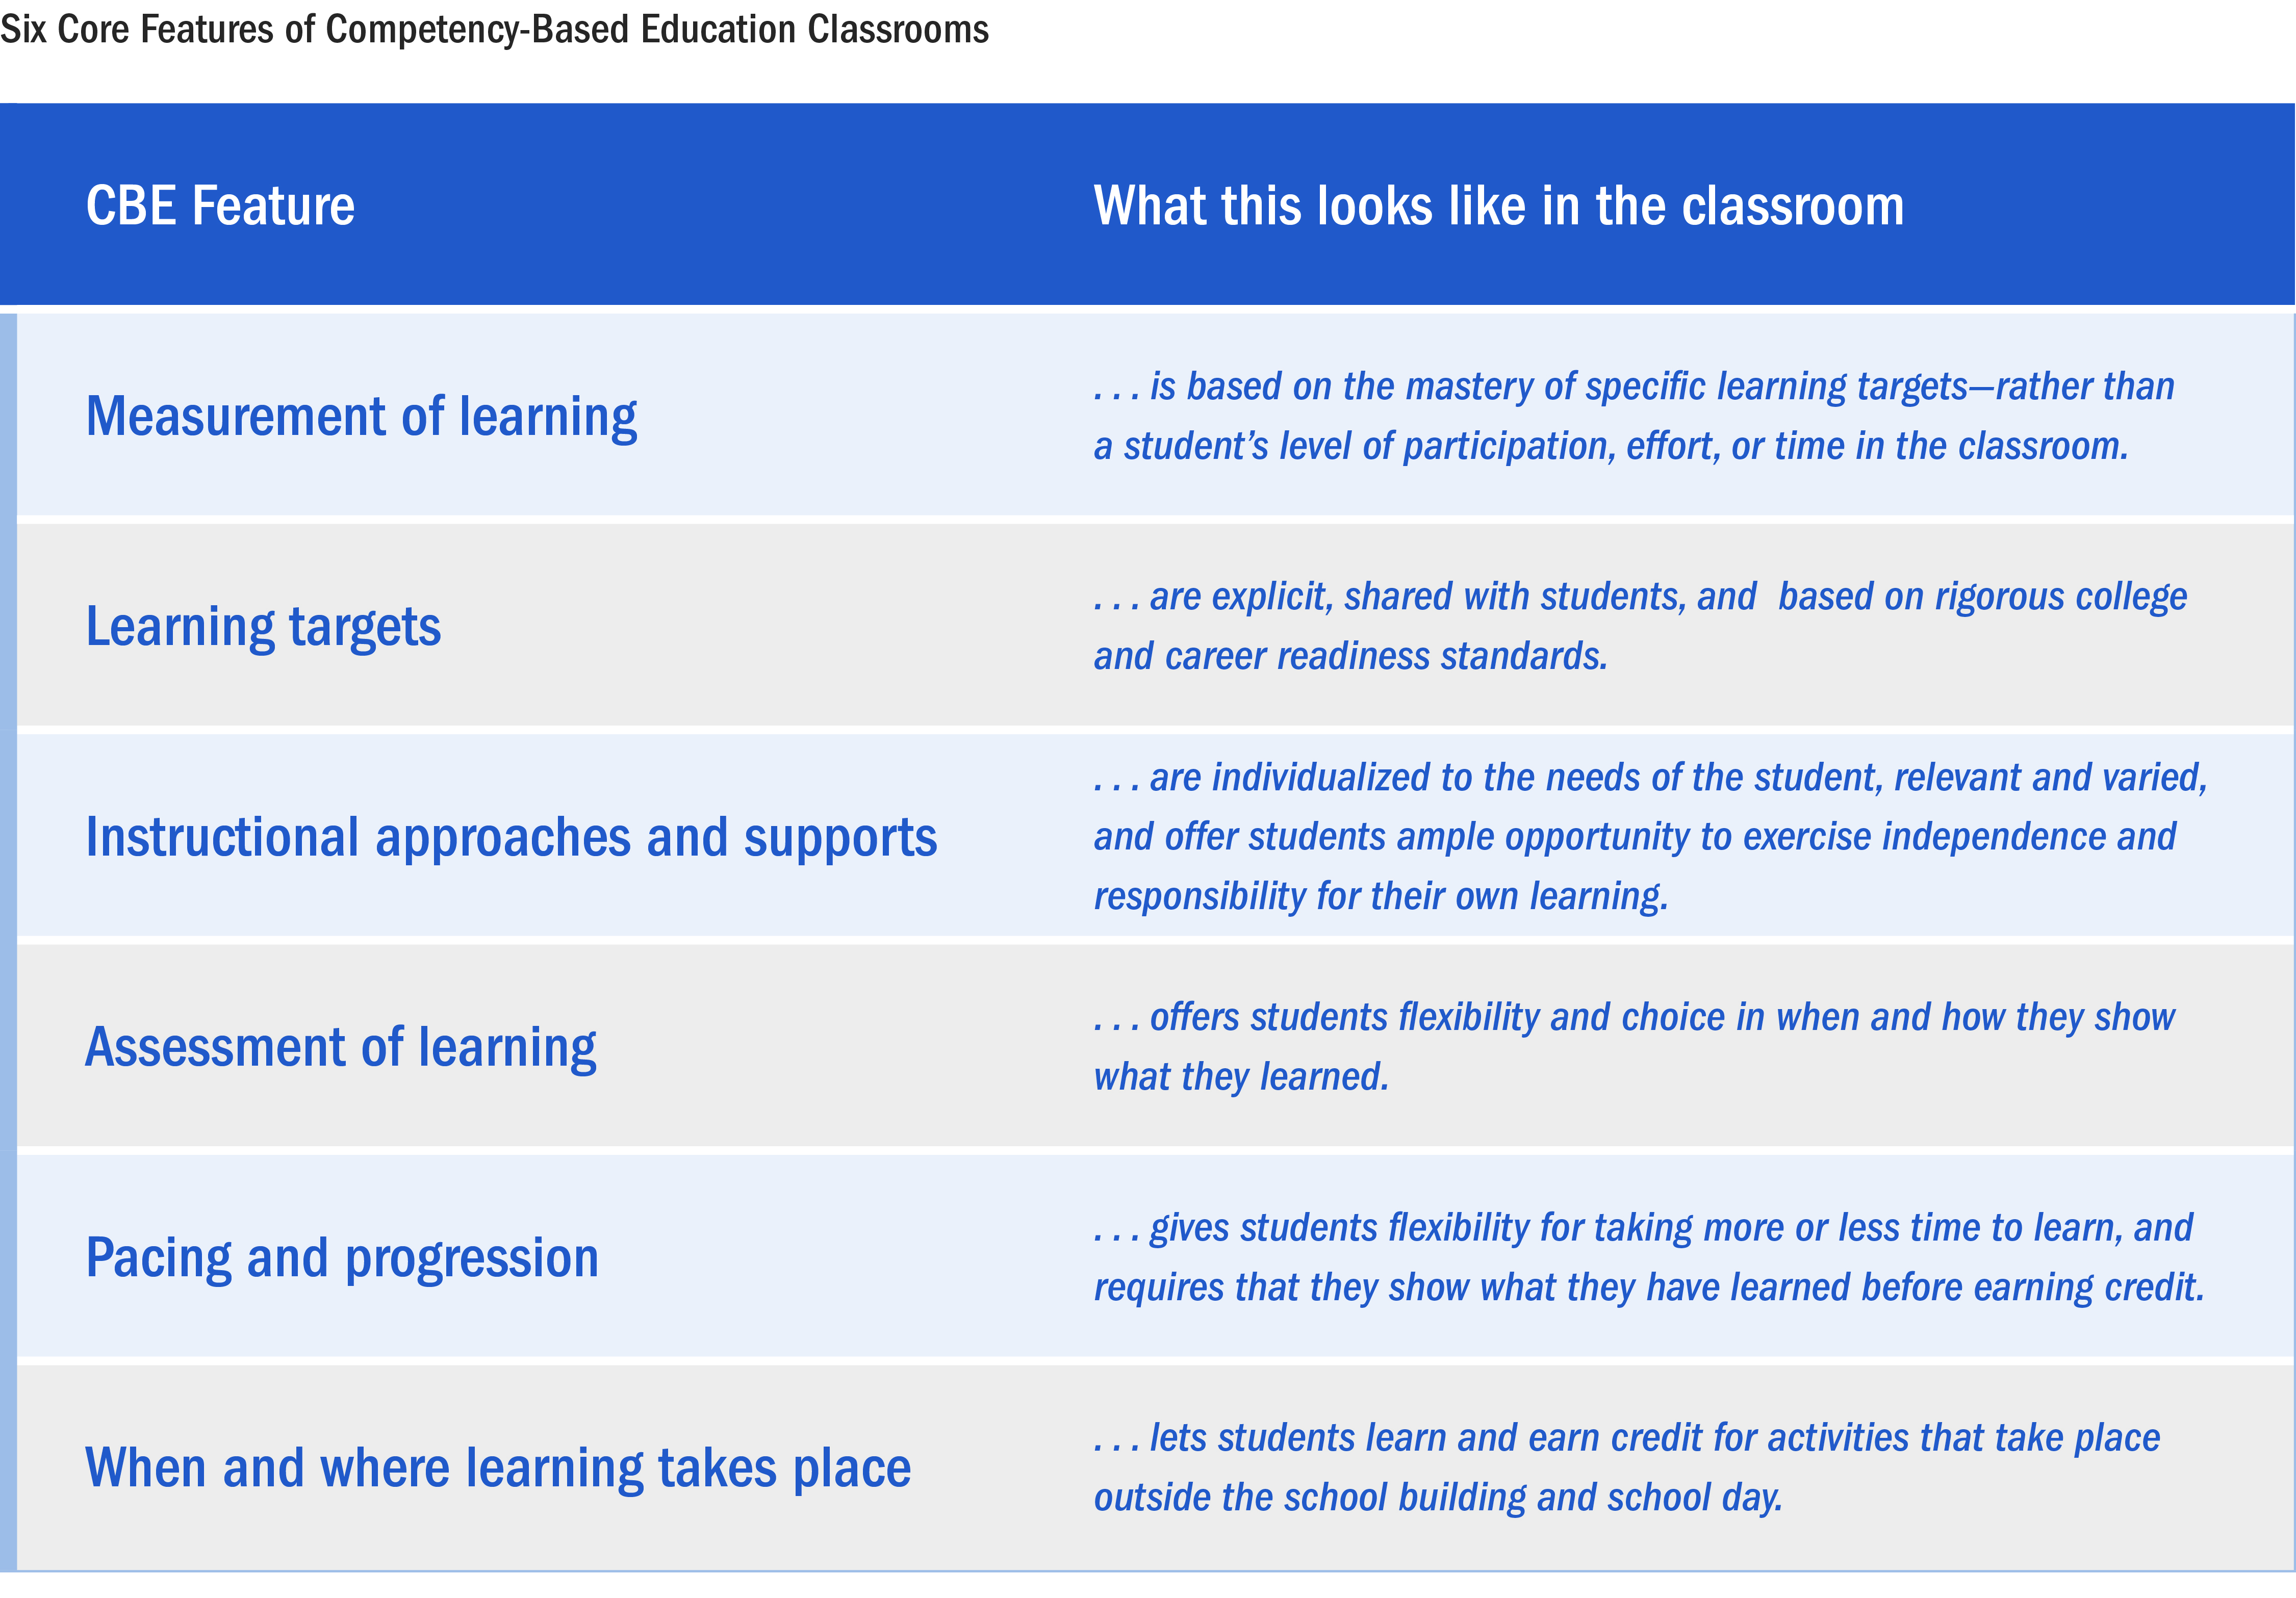 Graphic: Six Core Features of Competency-Based Education Classrooms